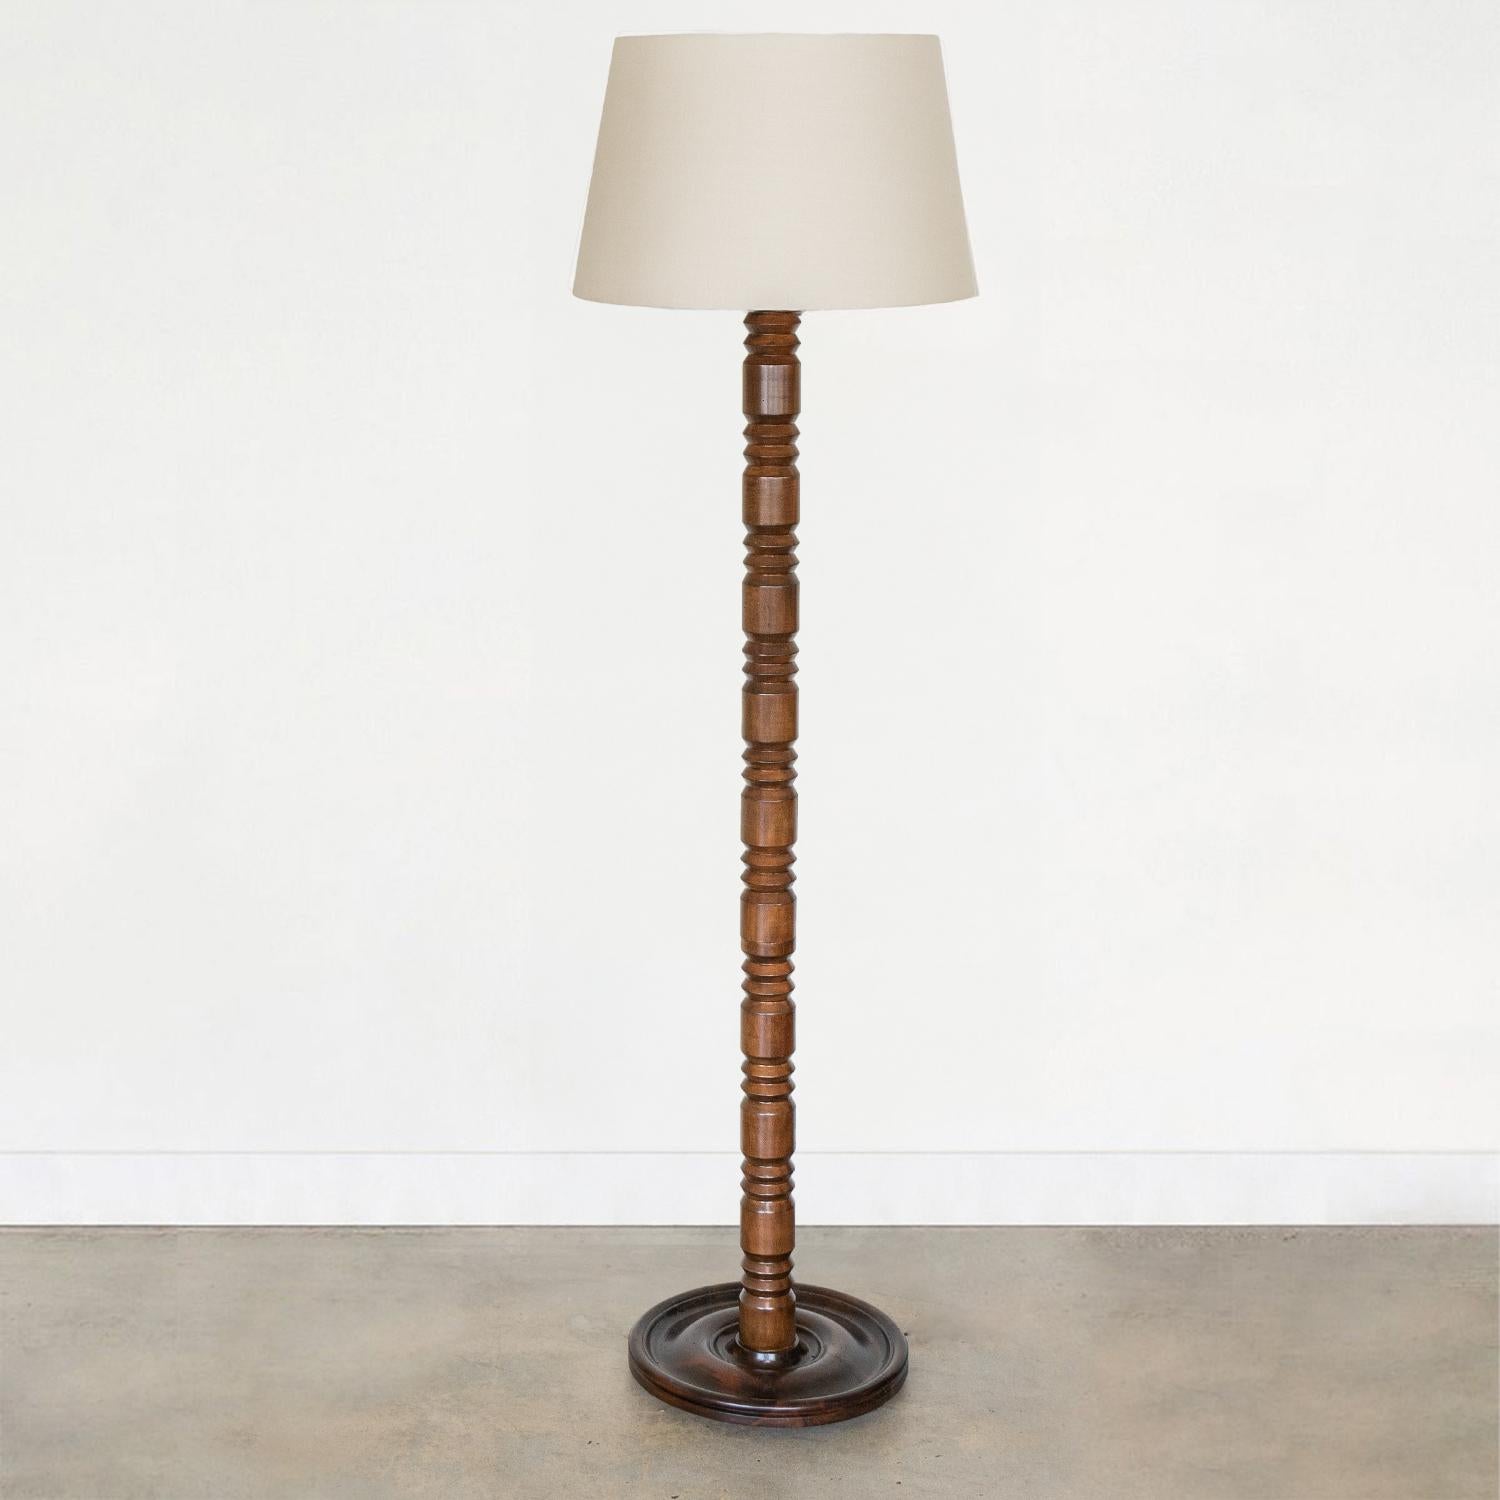 Lovely carved wood floor lamp by Charles Dudouyt from France, 1940s. Great carved design on stem with newly refinished dark stain on wood. Newly re-wired and new linen shade. Vintage wood shows pinholes throughout and repaired crack on base.